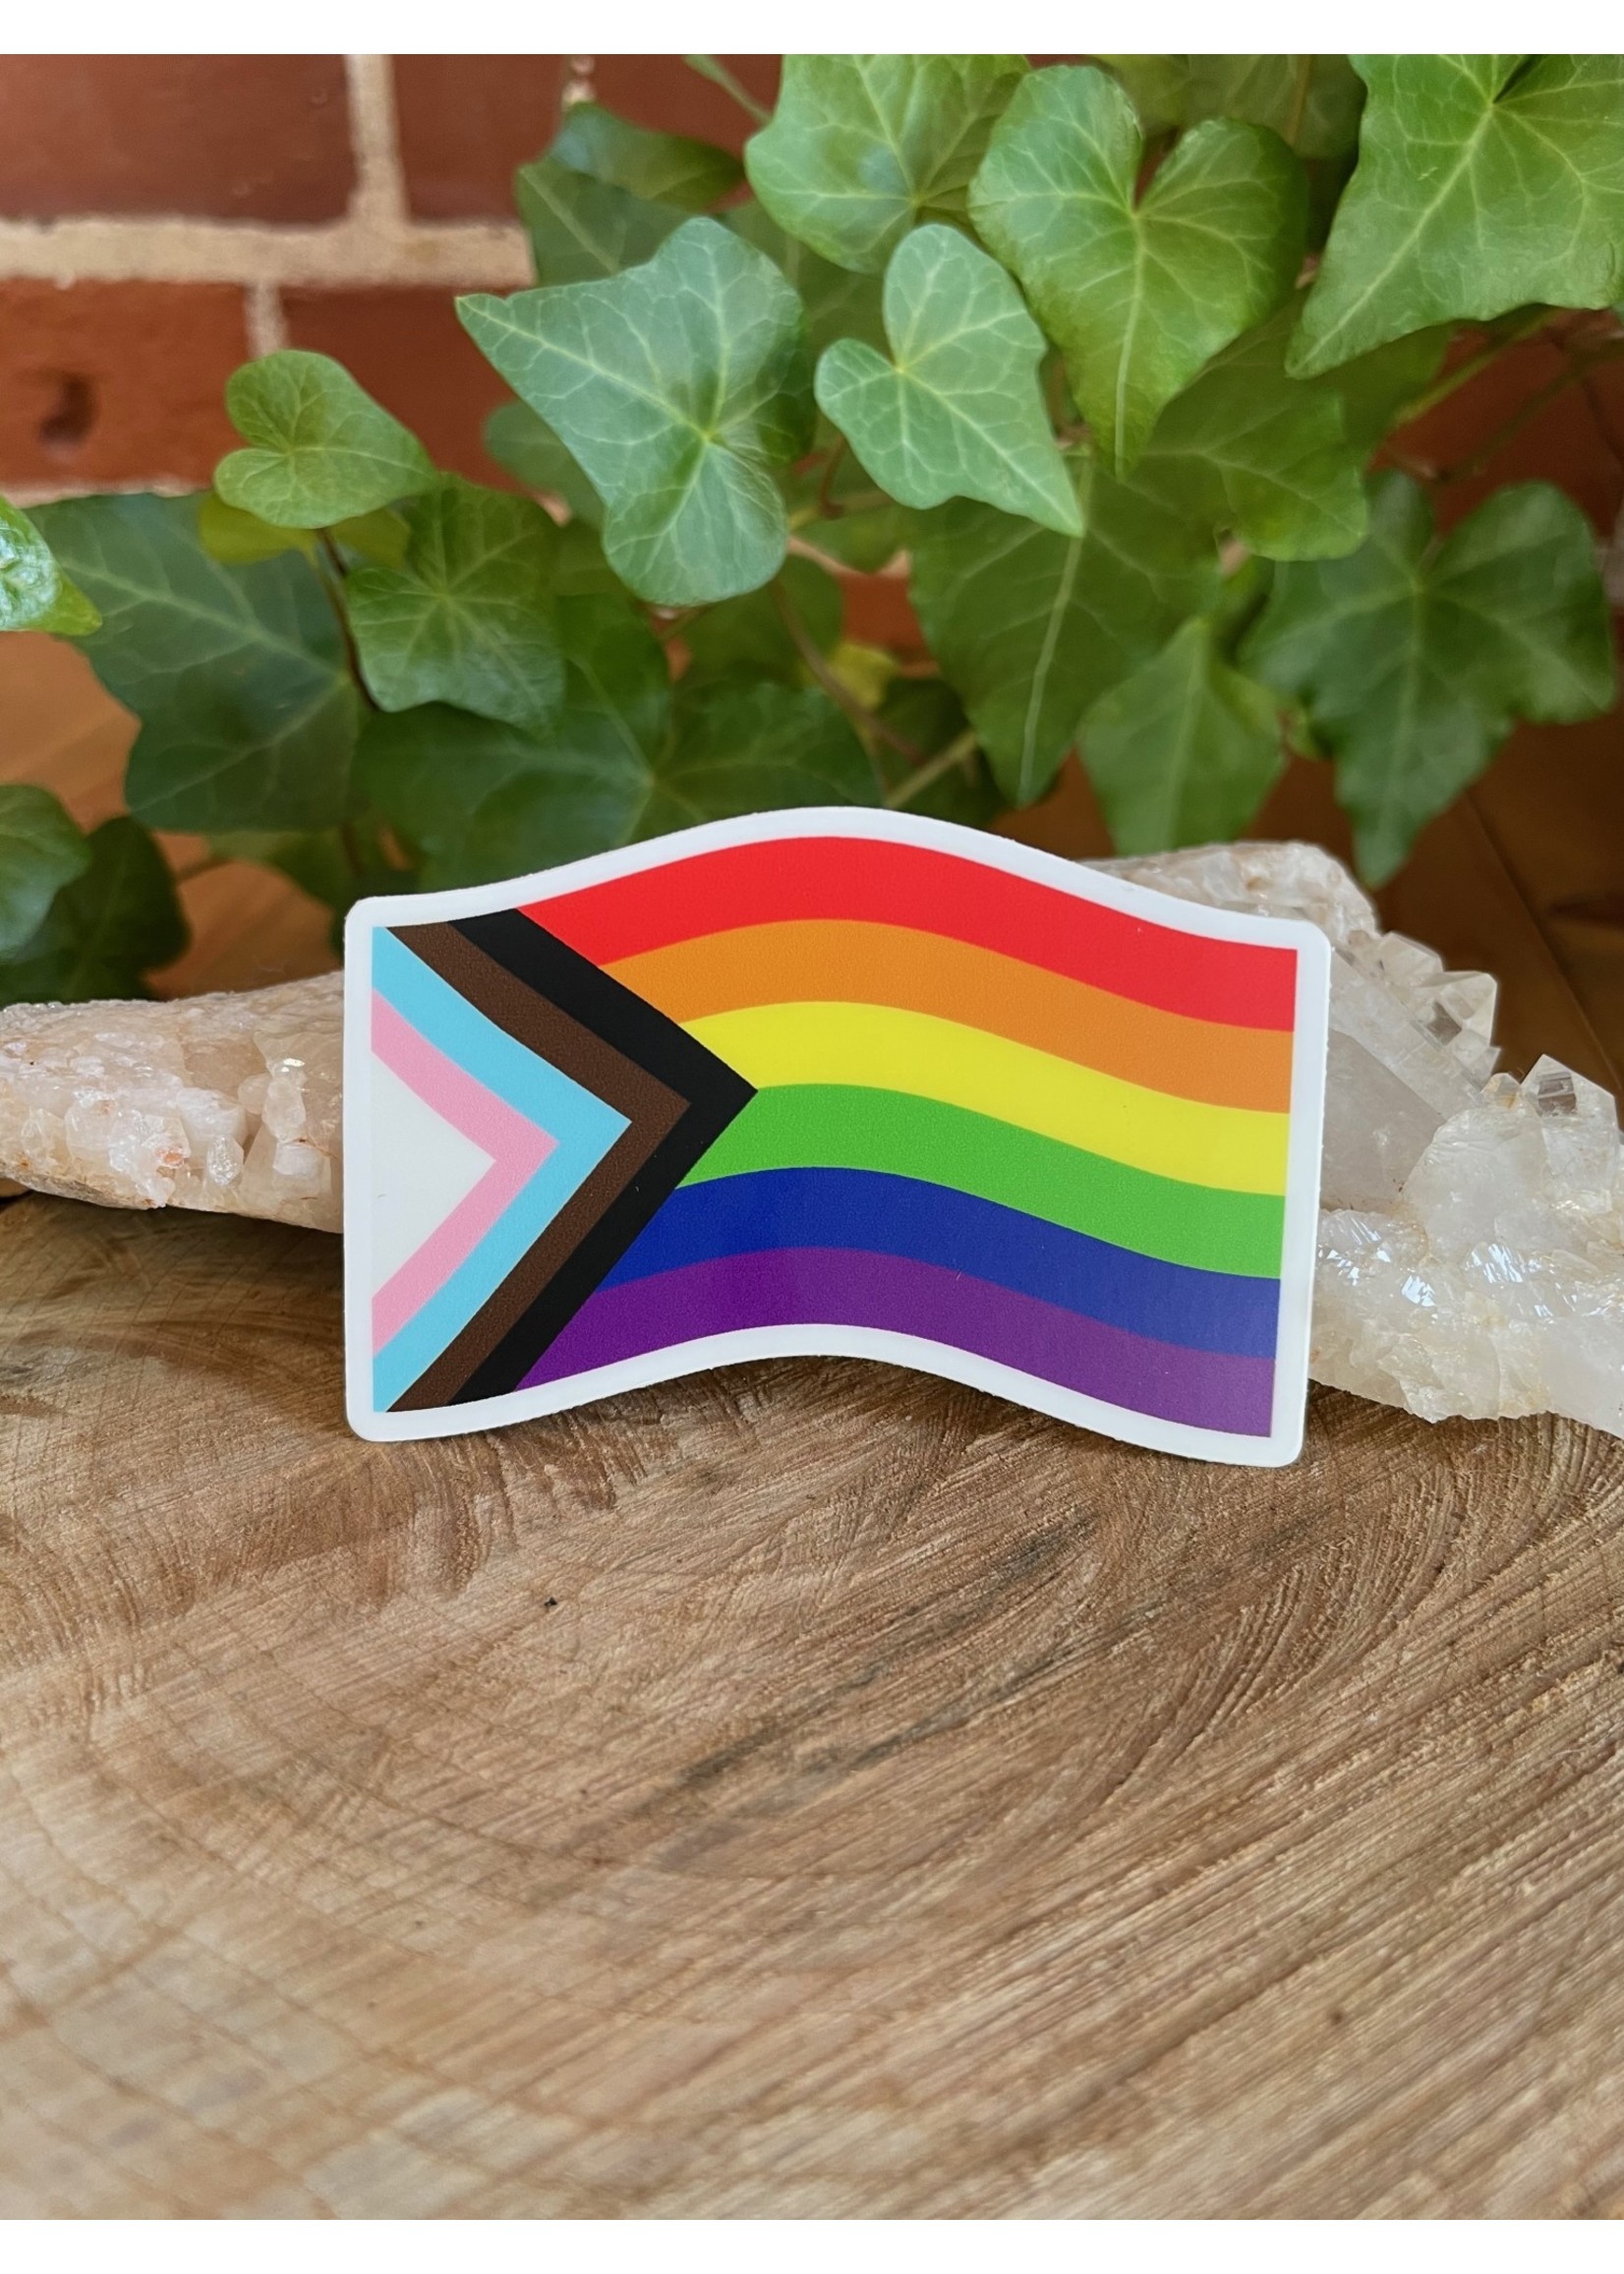 Tangled Up In Hue Wholesale Sticker - Pride Flag